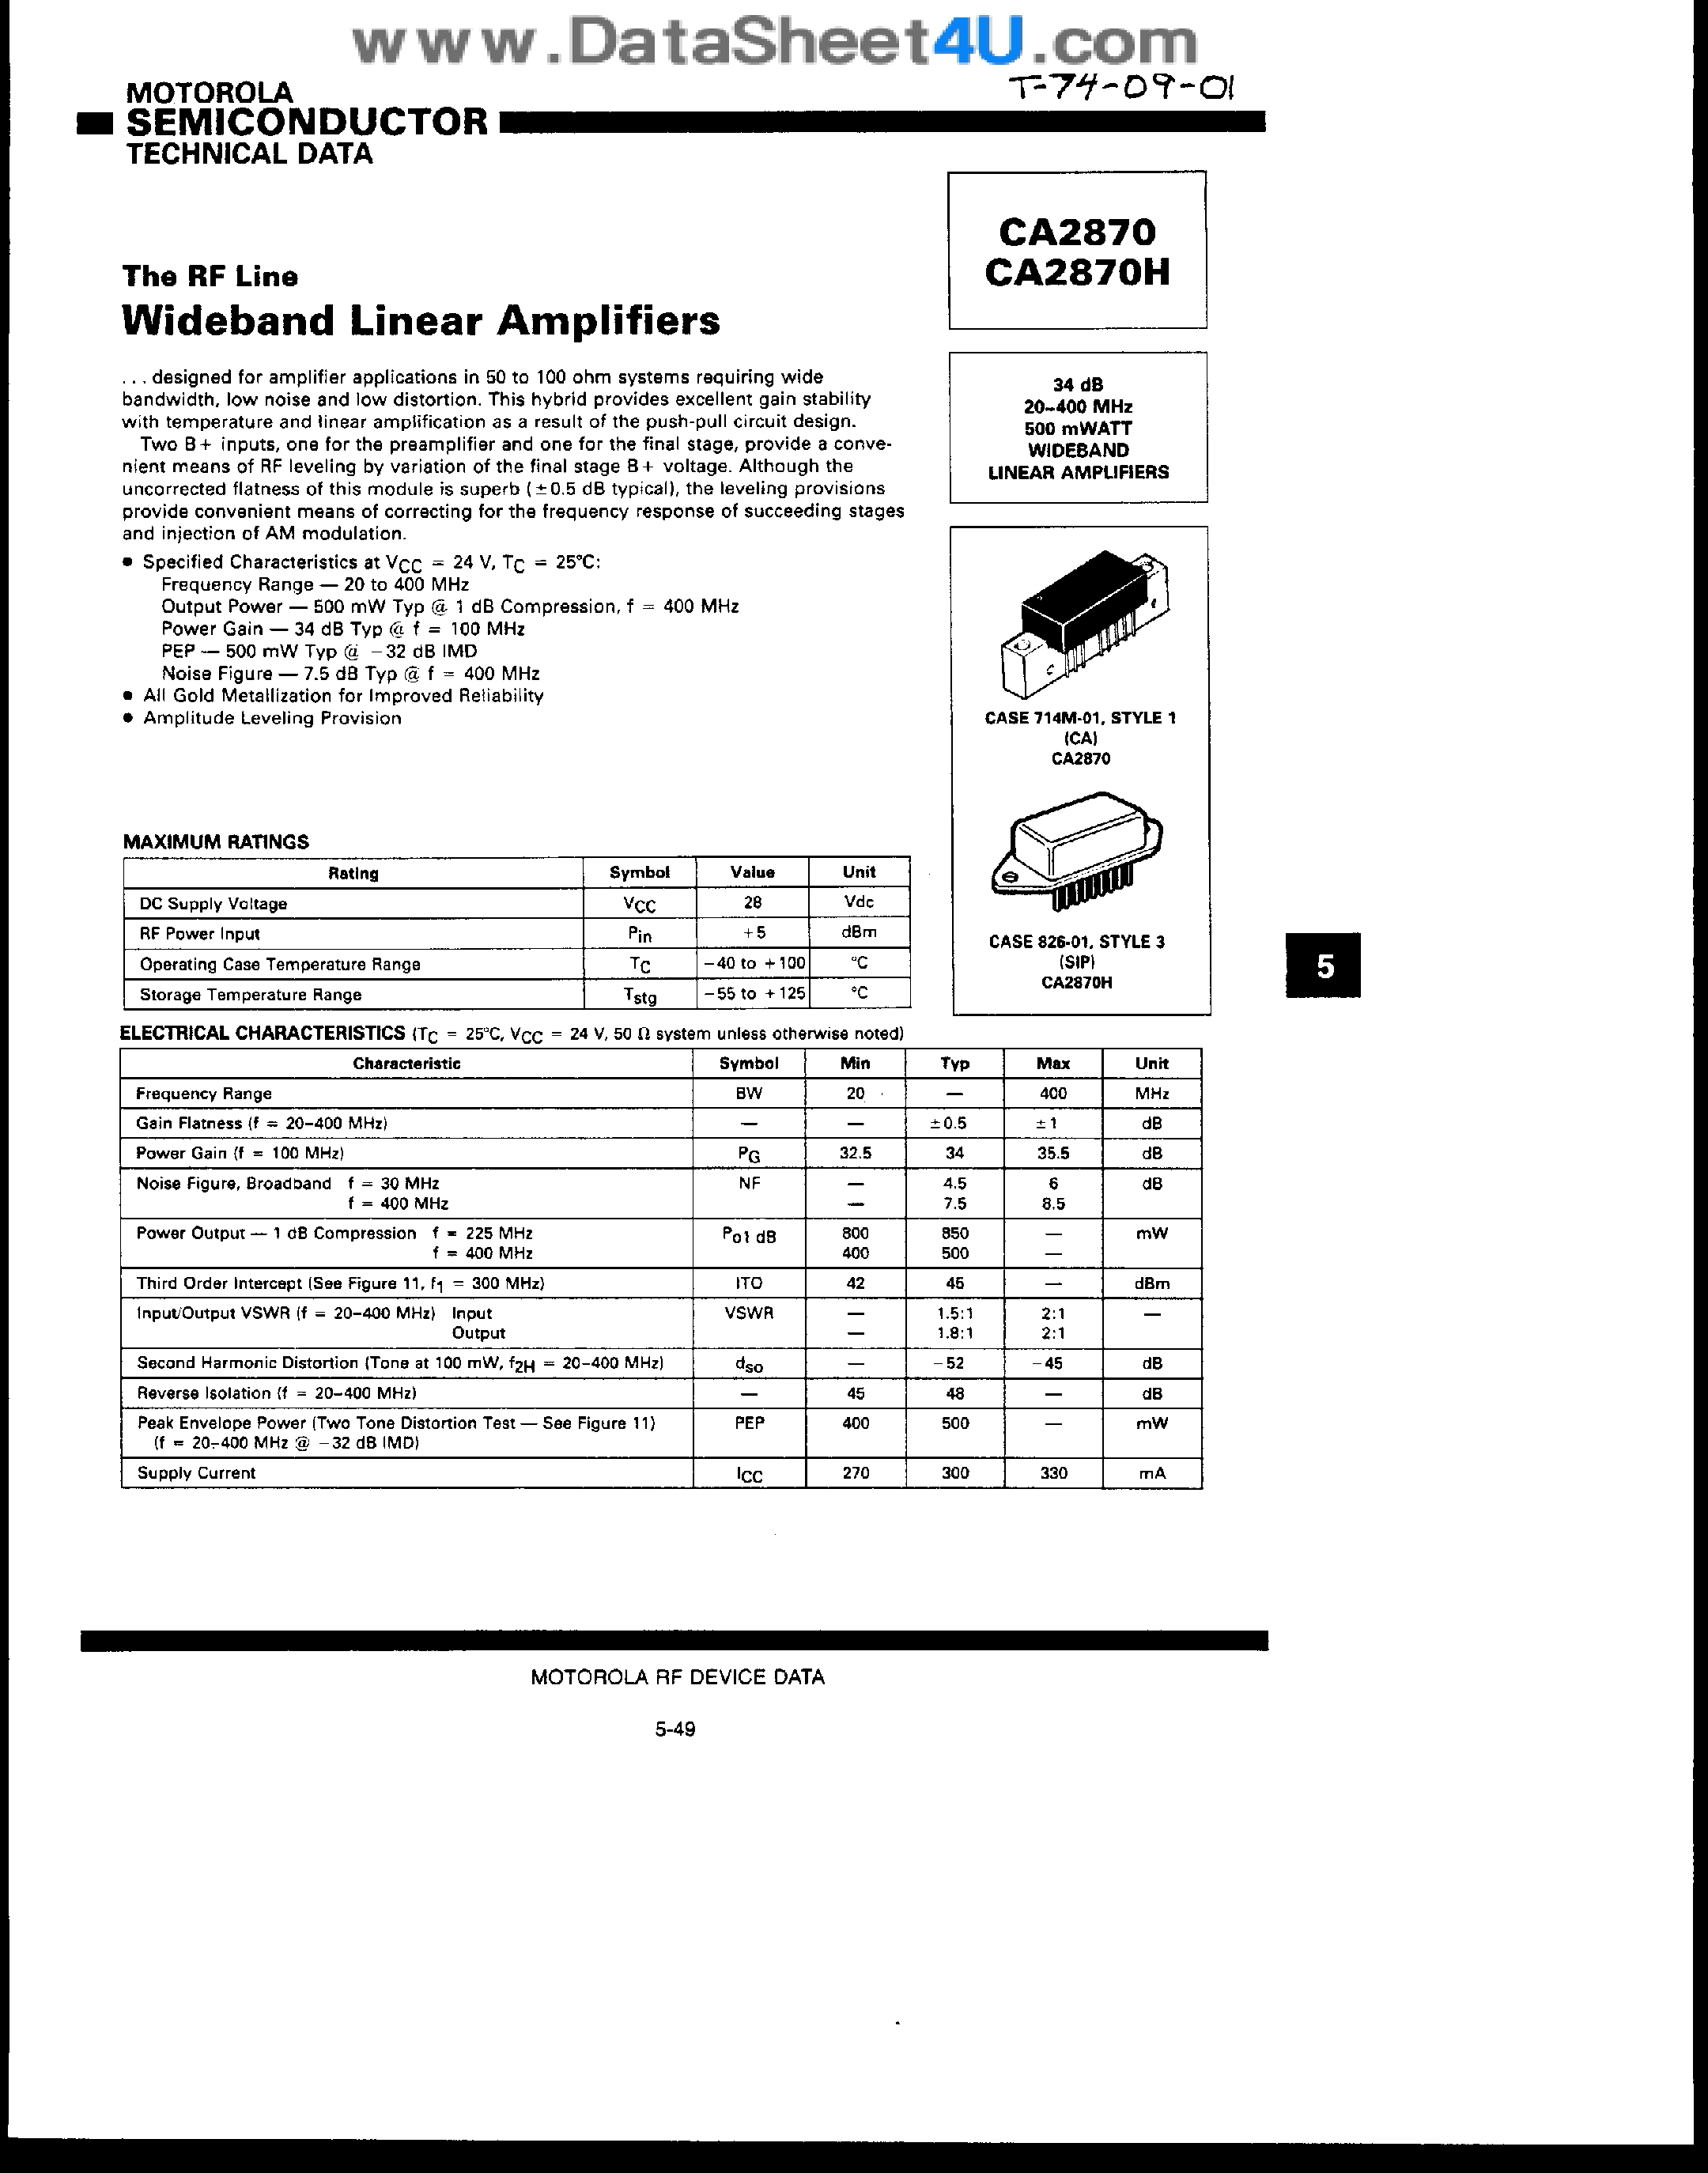 Datasheet CA2870 - Wideband Linear Amplifiers page 1